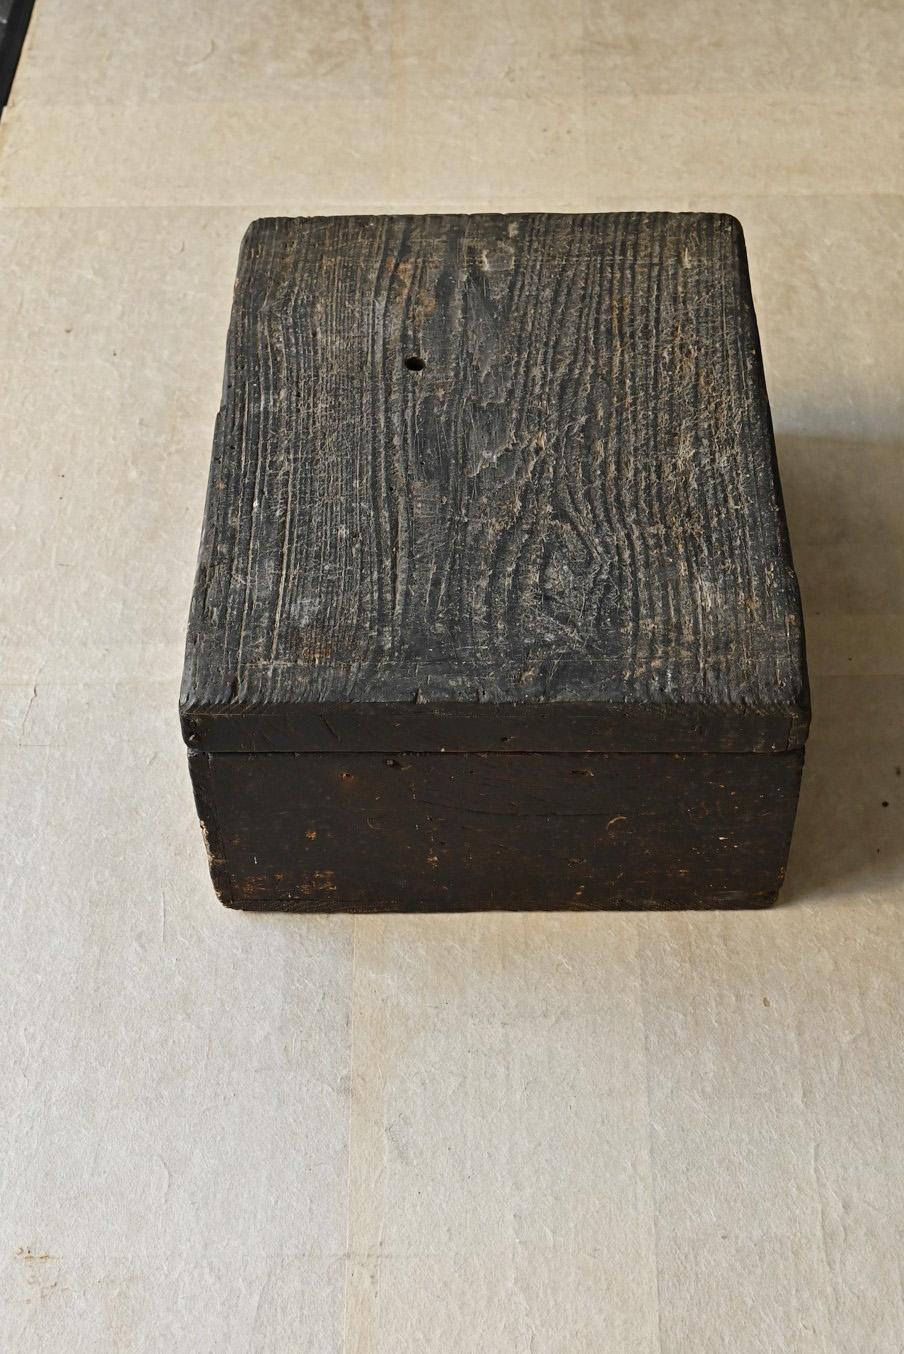 It is a wooden box made from the late Edo period to the Meiji period in Japan.
The material is cedar wood. Cedar is a tree that has been commonly used for Japanese tools and furniture since ancient times.
The wood grain inside the box is very